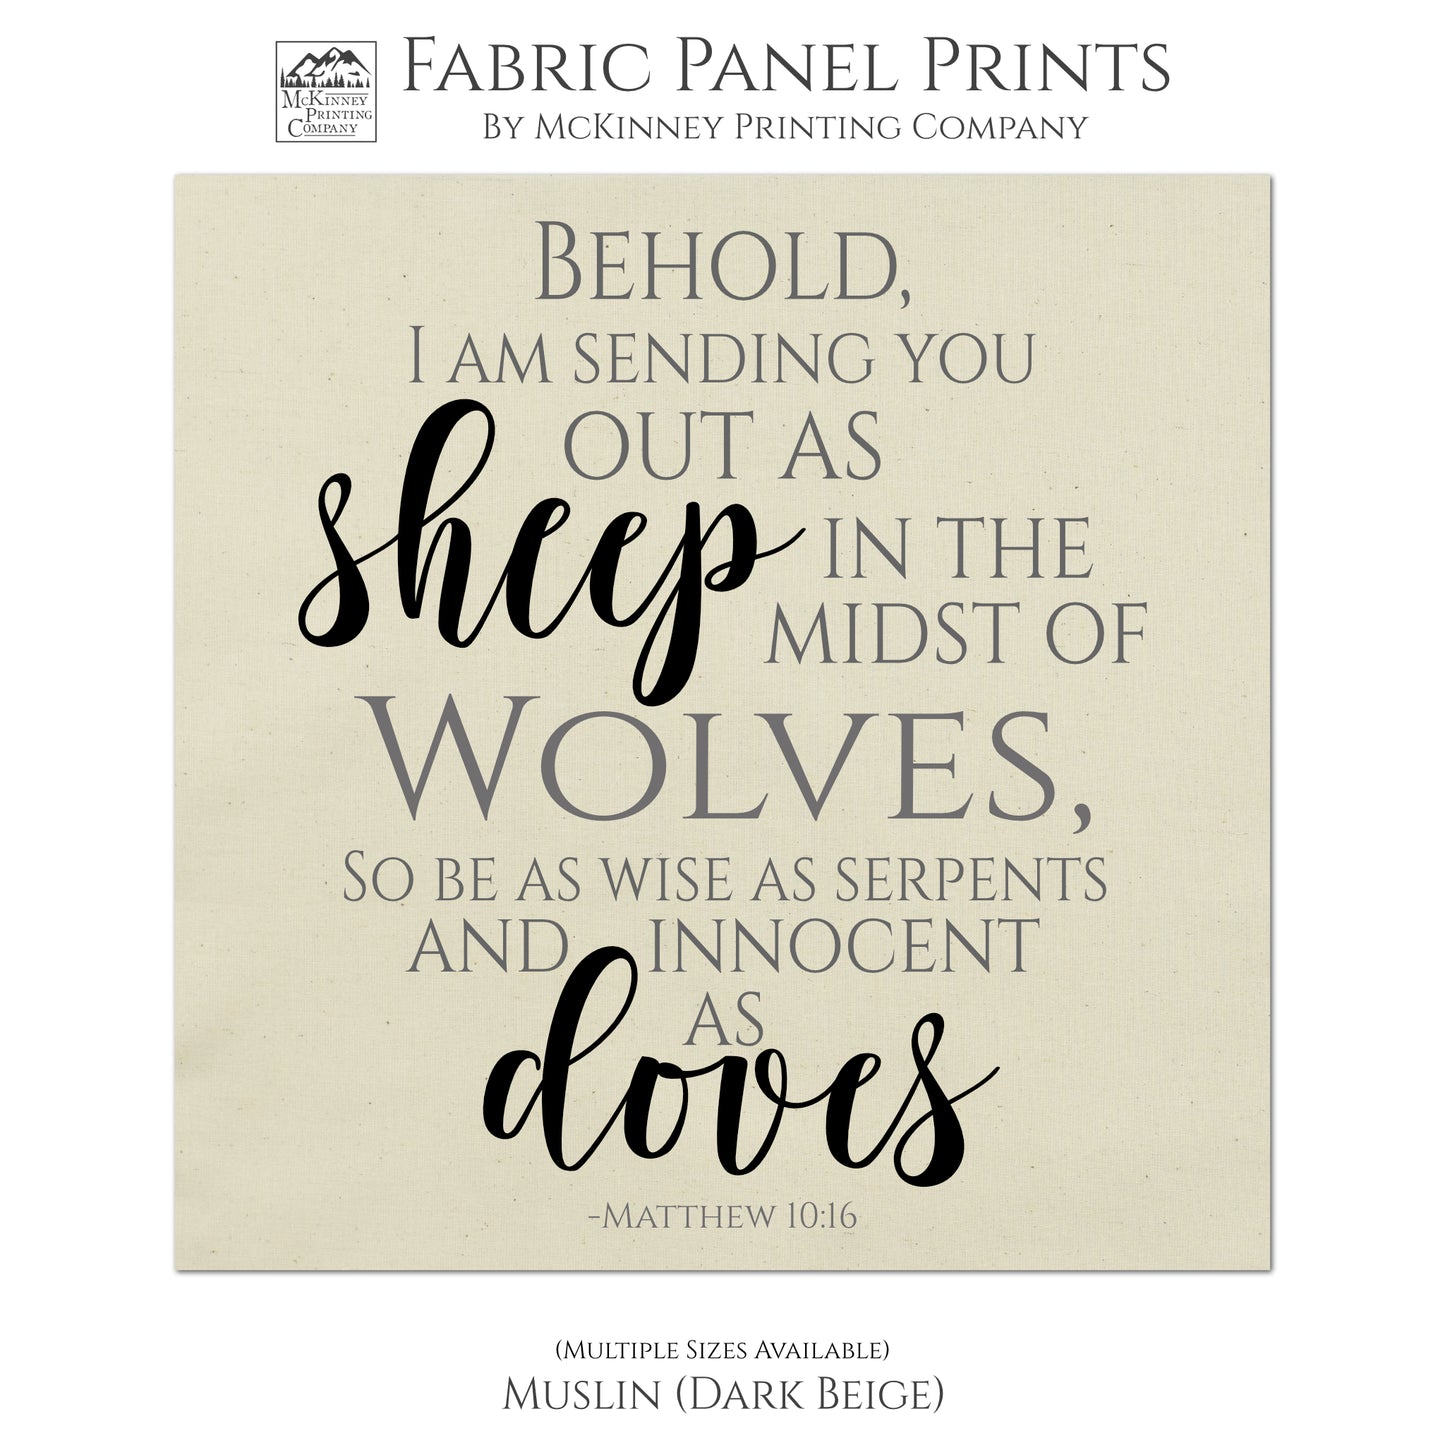 Behold, I am sending you out as sheep in the midst of wolves, so be as wise as serpents and innocent as doves. - Matthew 10 16, Bible Verse Wall Art, Scripture Fabric, Religious Fabric, Quilt Block - Muslin